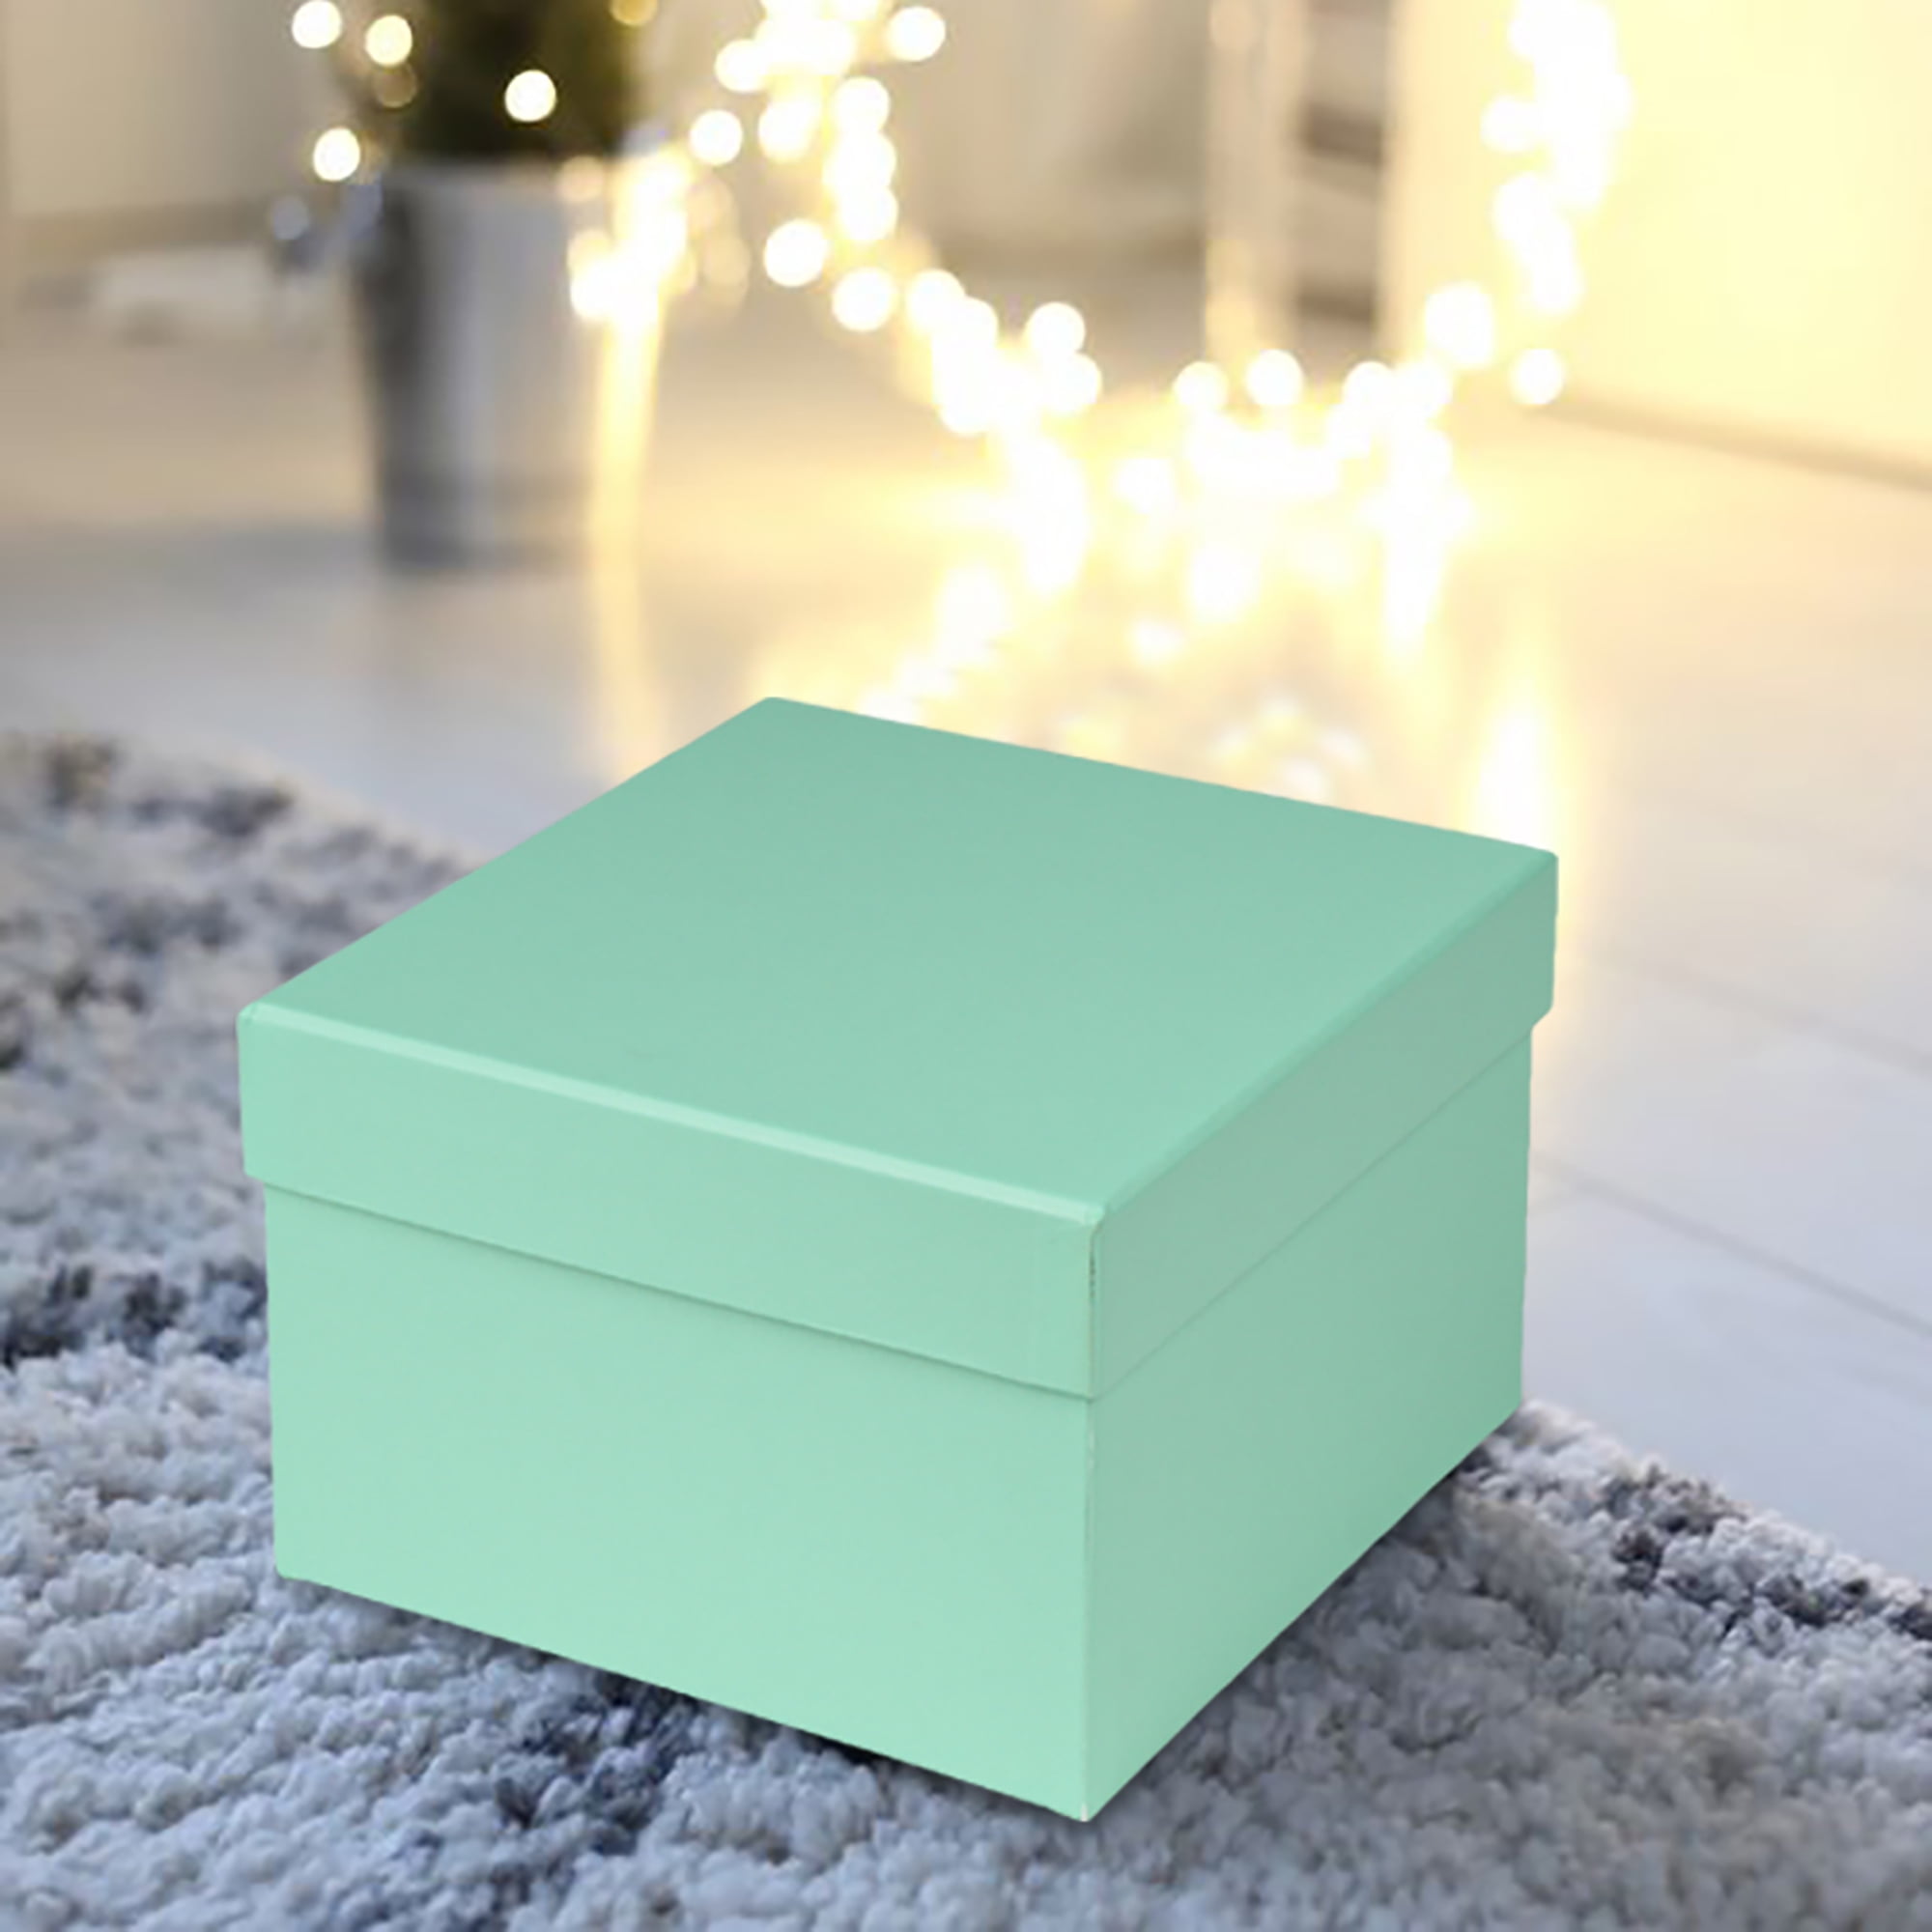 Briful Square Gift Boxes with Lids Set of 4 Teal Green Gift Box Assorted  Sizes Nesting Gift Boxes for Presents Birthday Bridesmaid Wedd